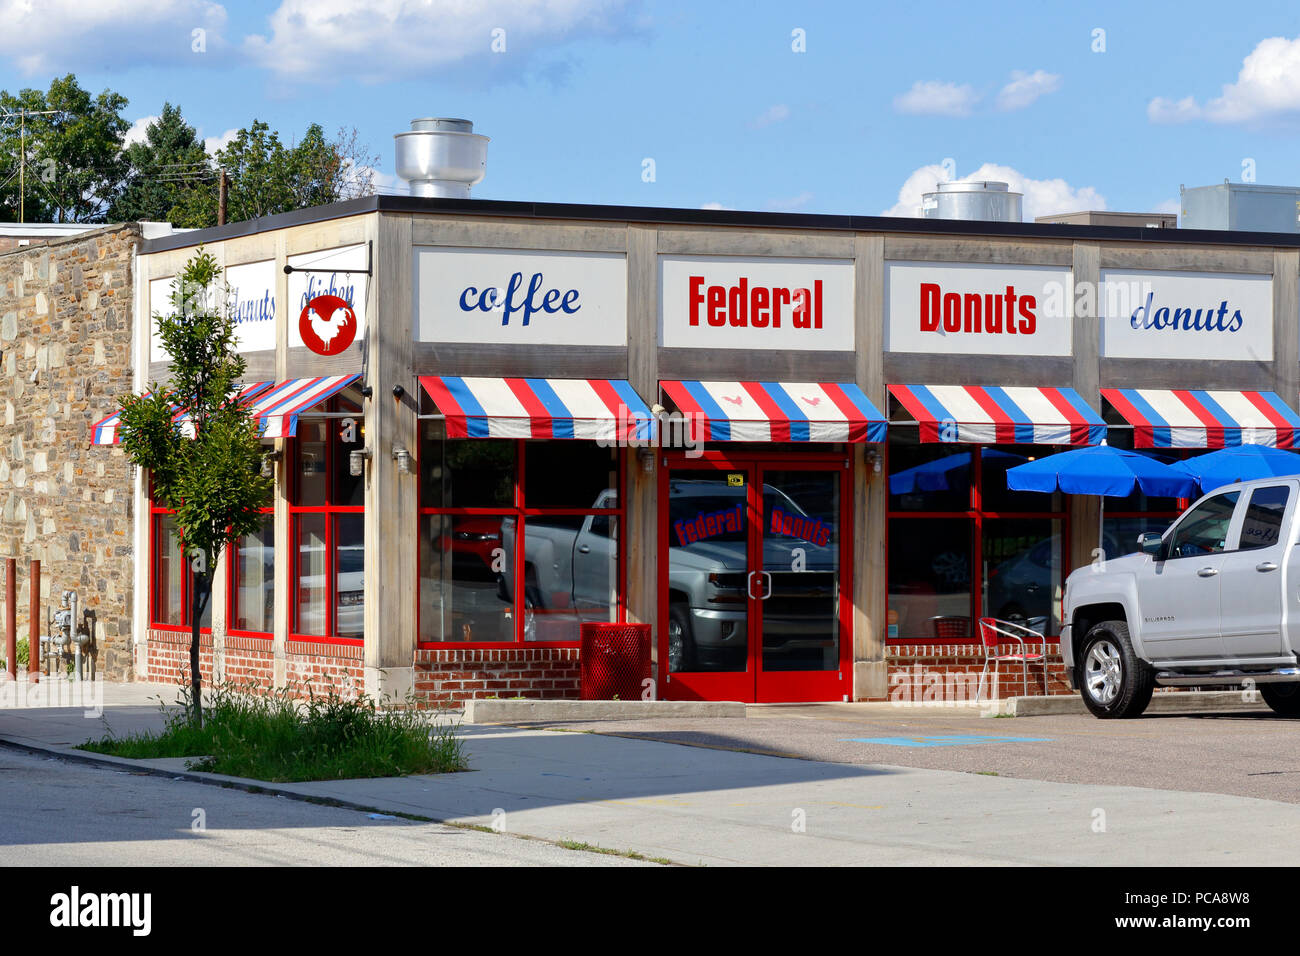 Federal Donuts, 701 N 7th St, Philadelphia, PA. exterior of a fried chicken and donut shop Stock Photo